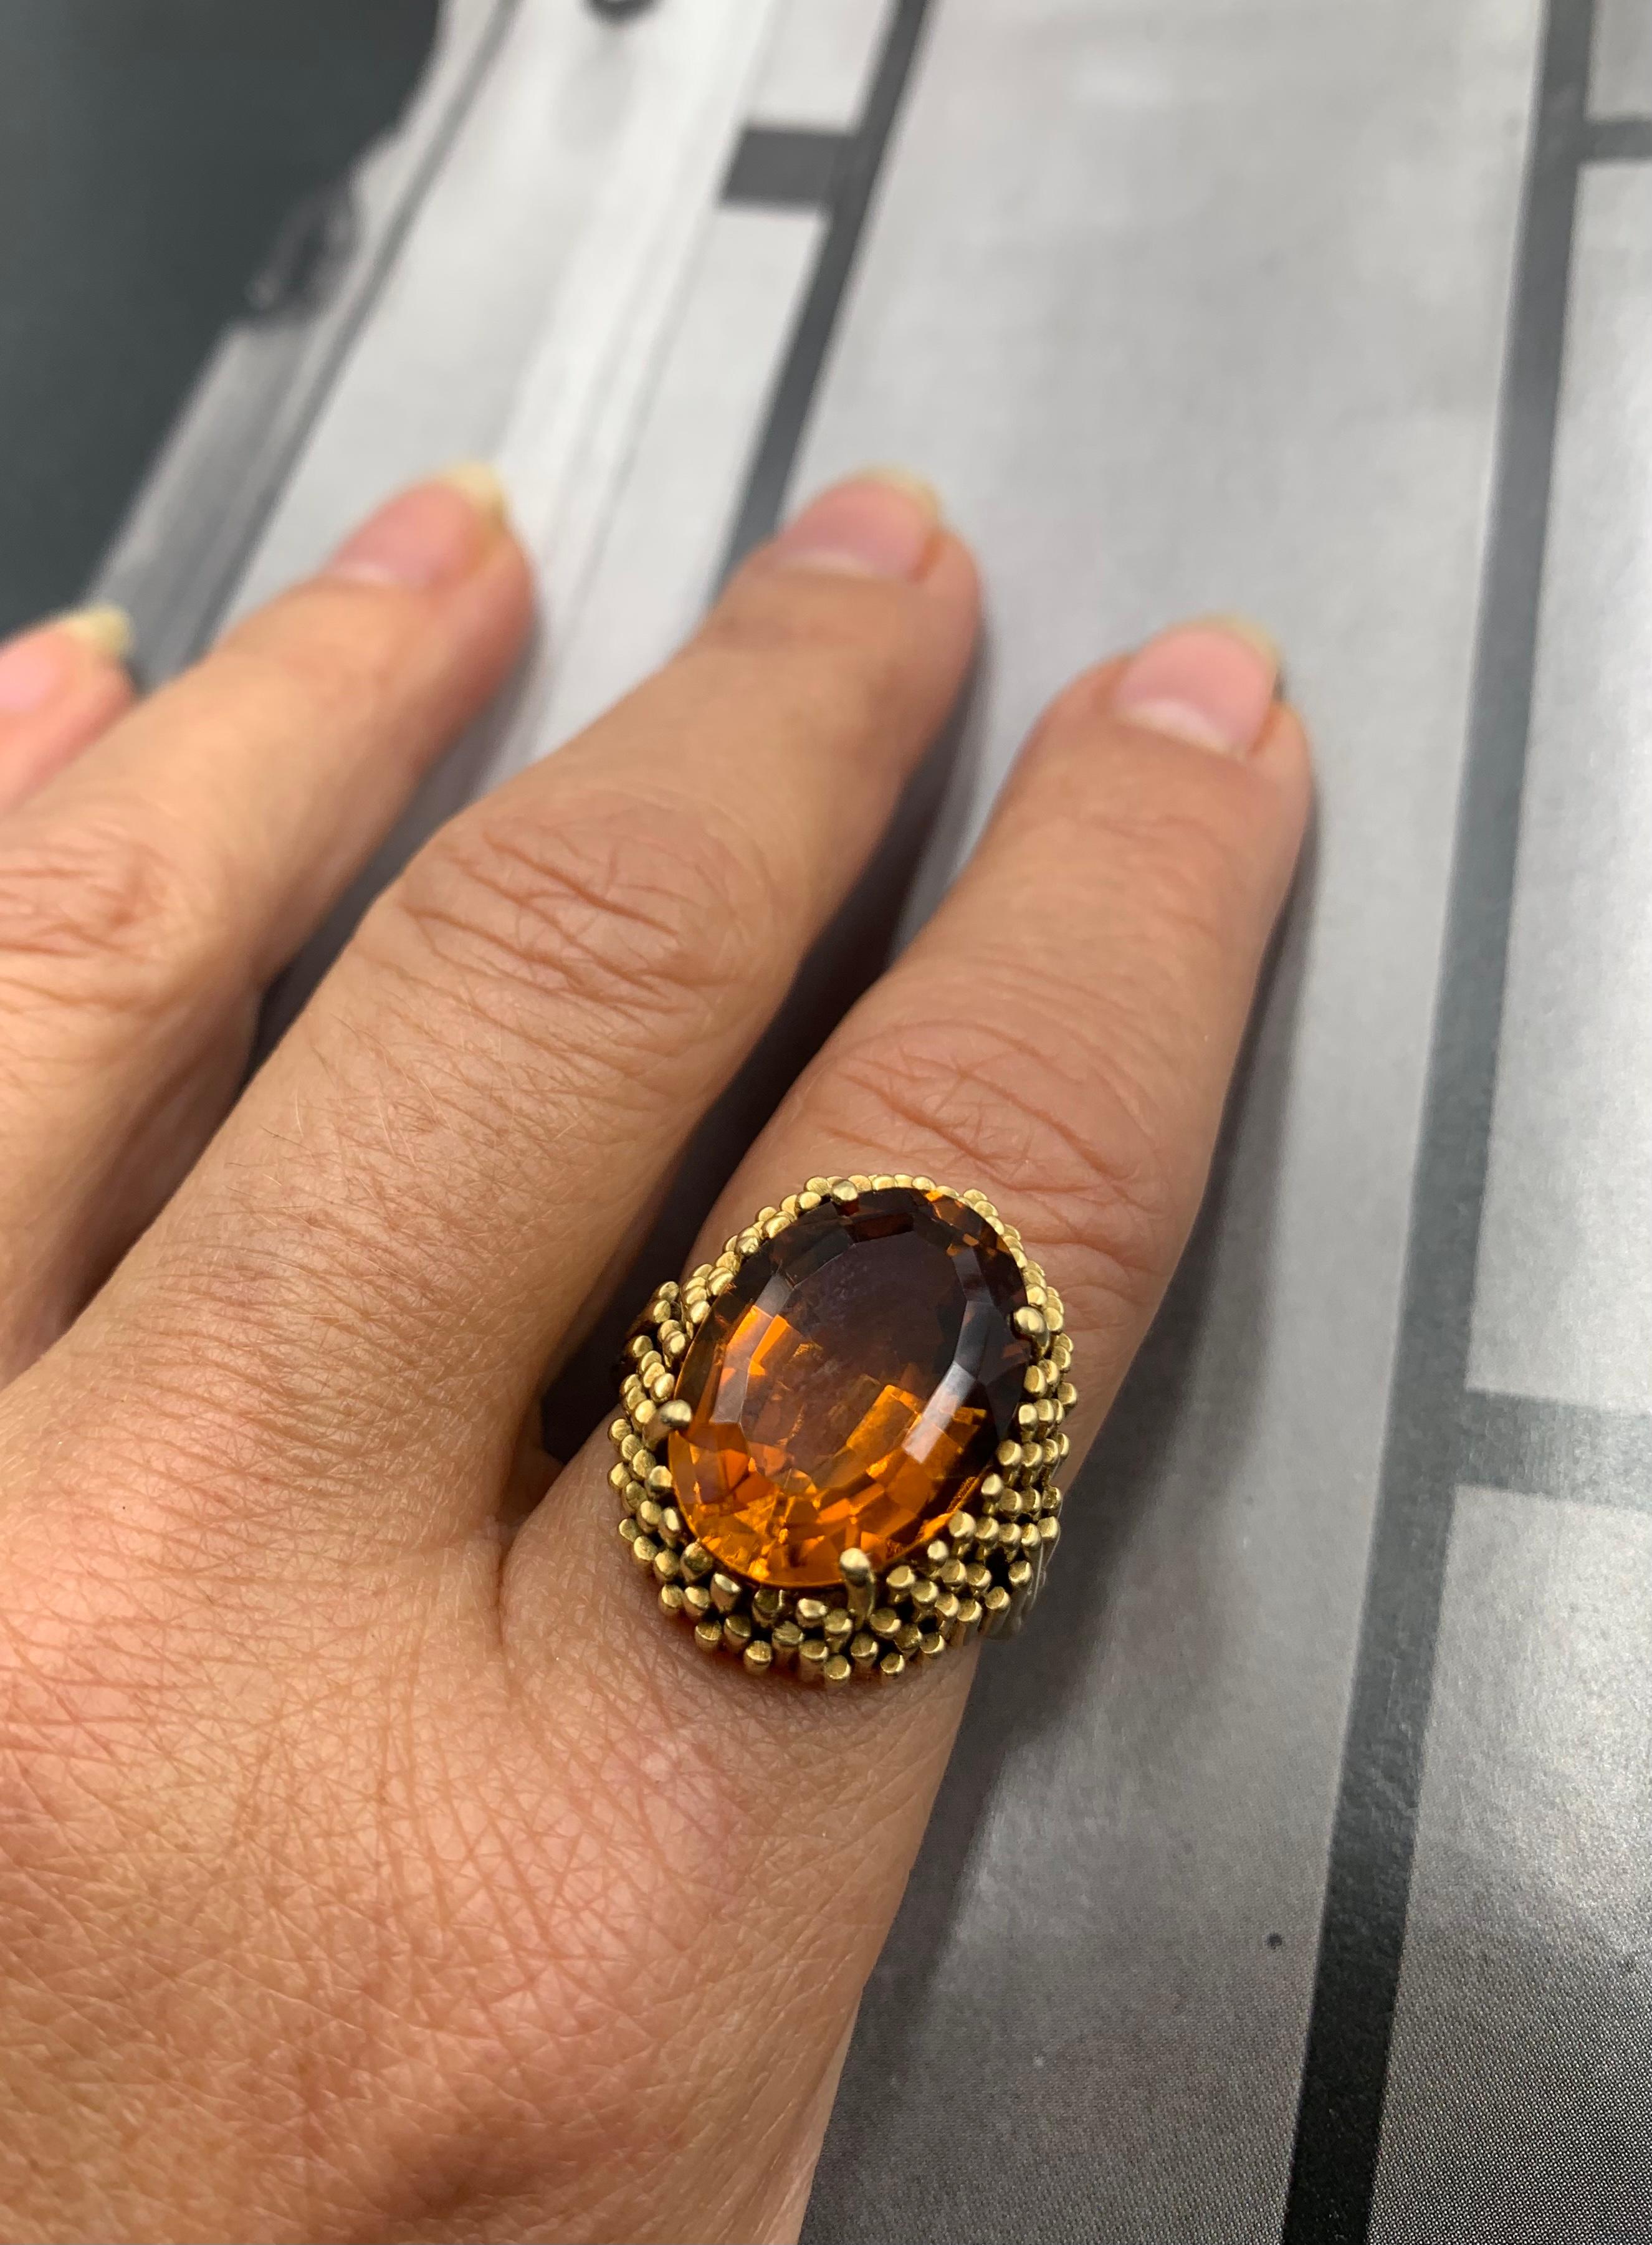 Streamlined, sophisticated Art Deco period 18K gold City Skyline statement ring featuring a superb vivid golden orange oval facet cut citrine of excellent color and clarity. The substantial 18K yellow gold setting is a stylized city skyline composed